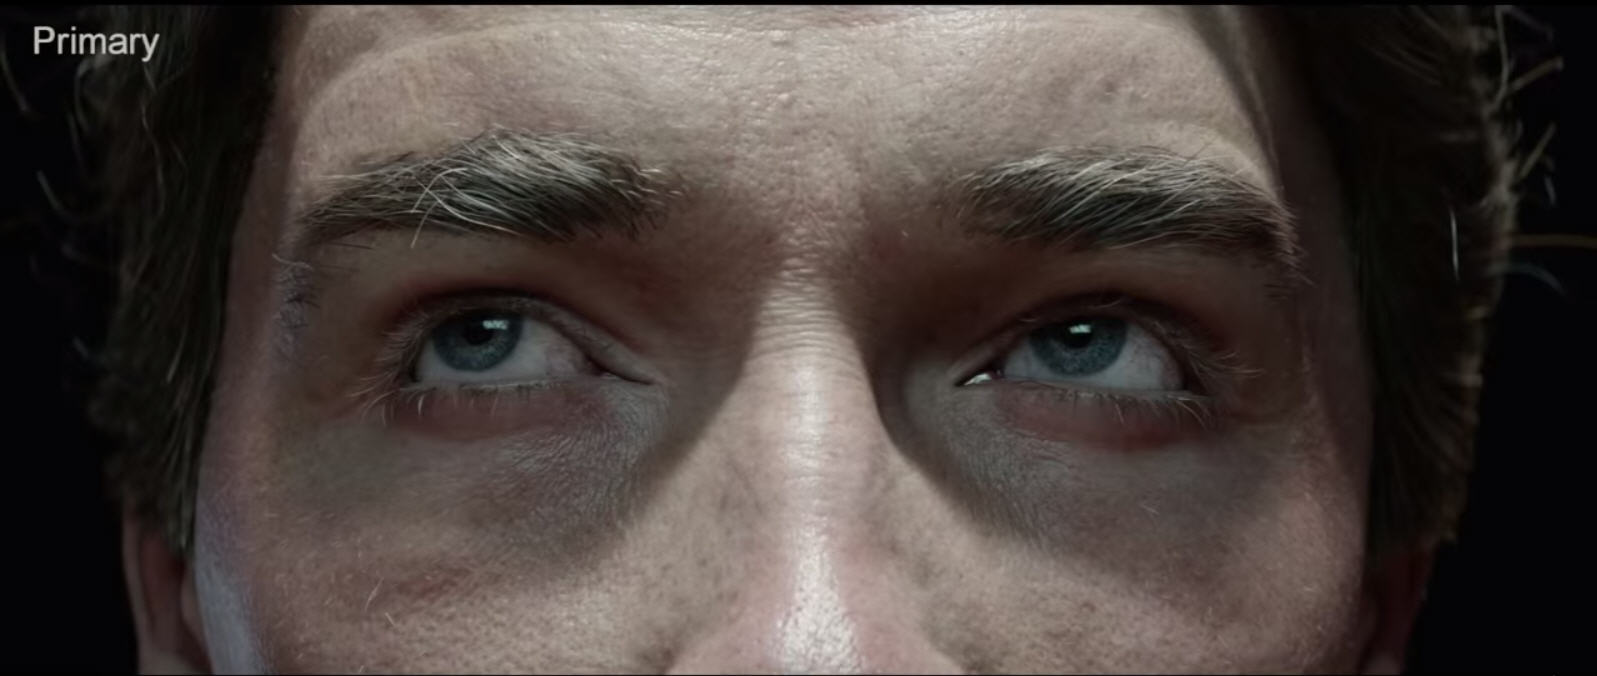 What are CGI eyes?